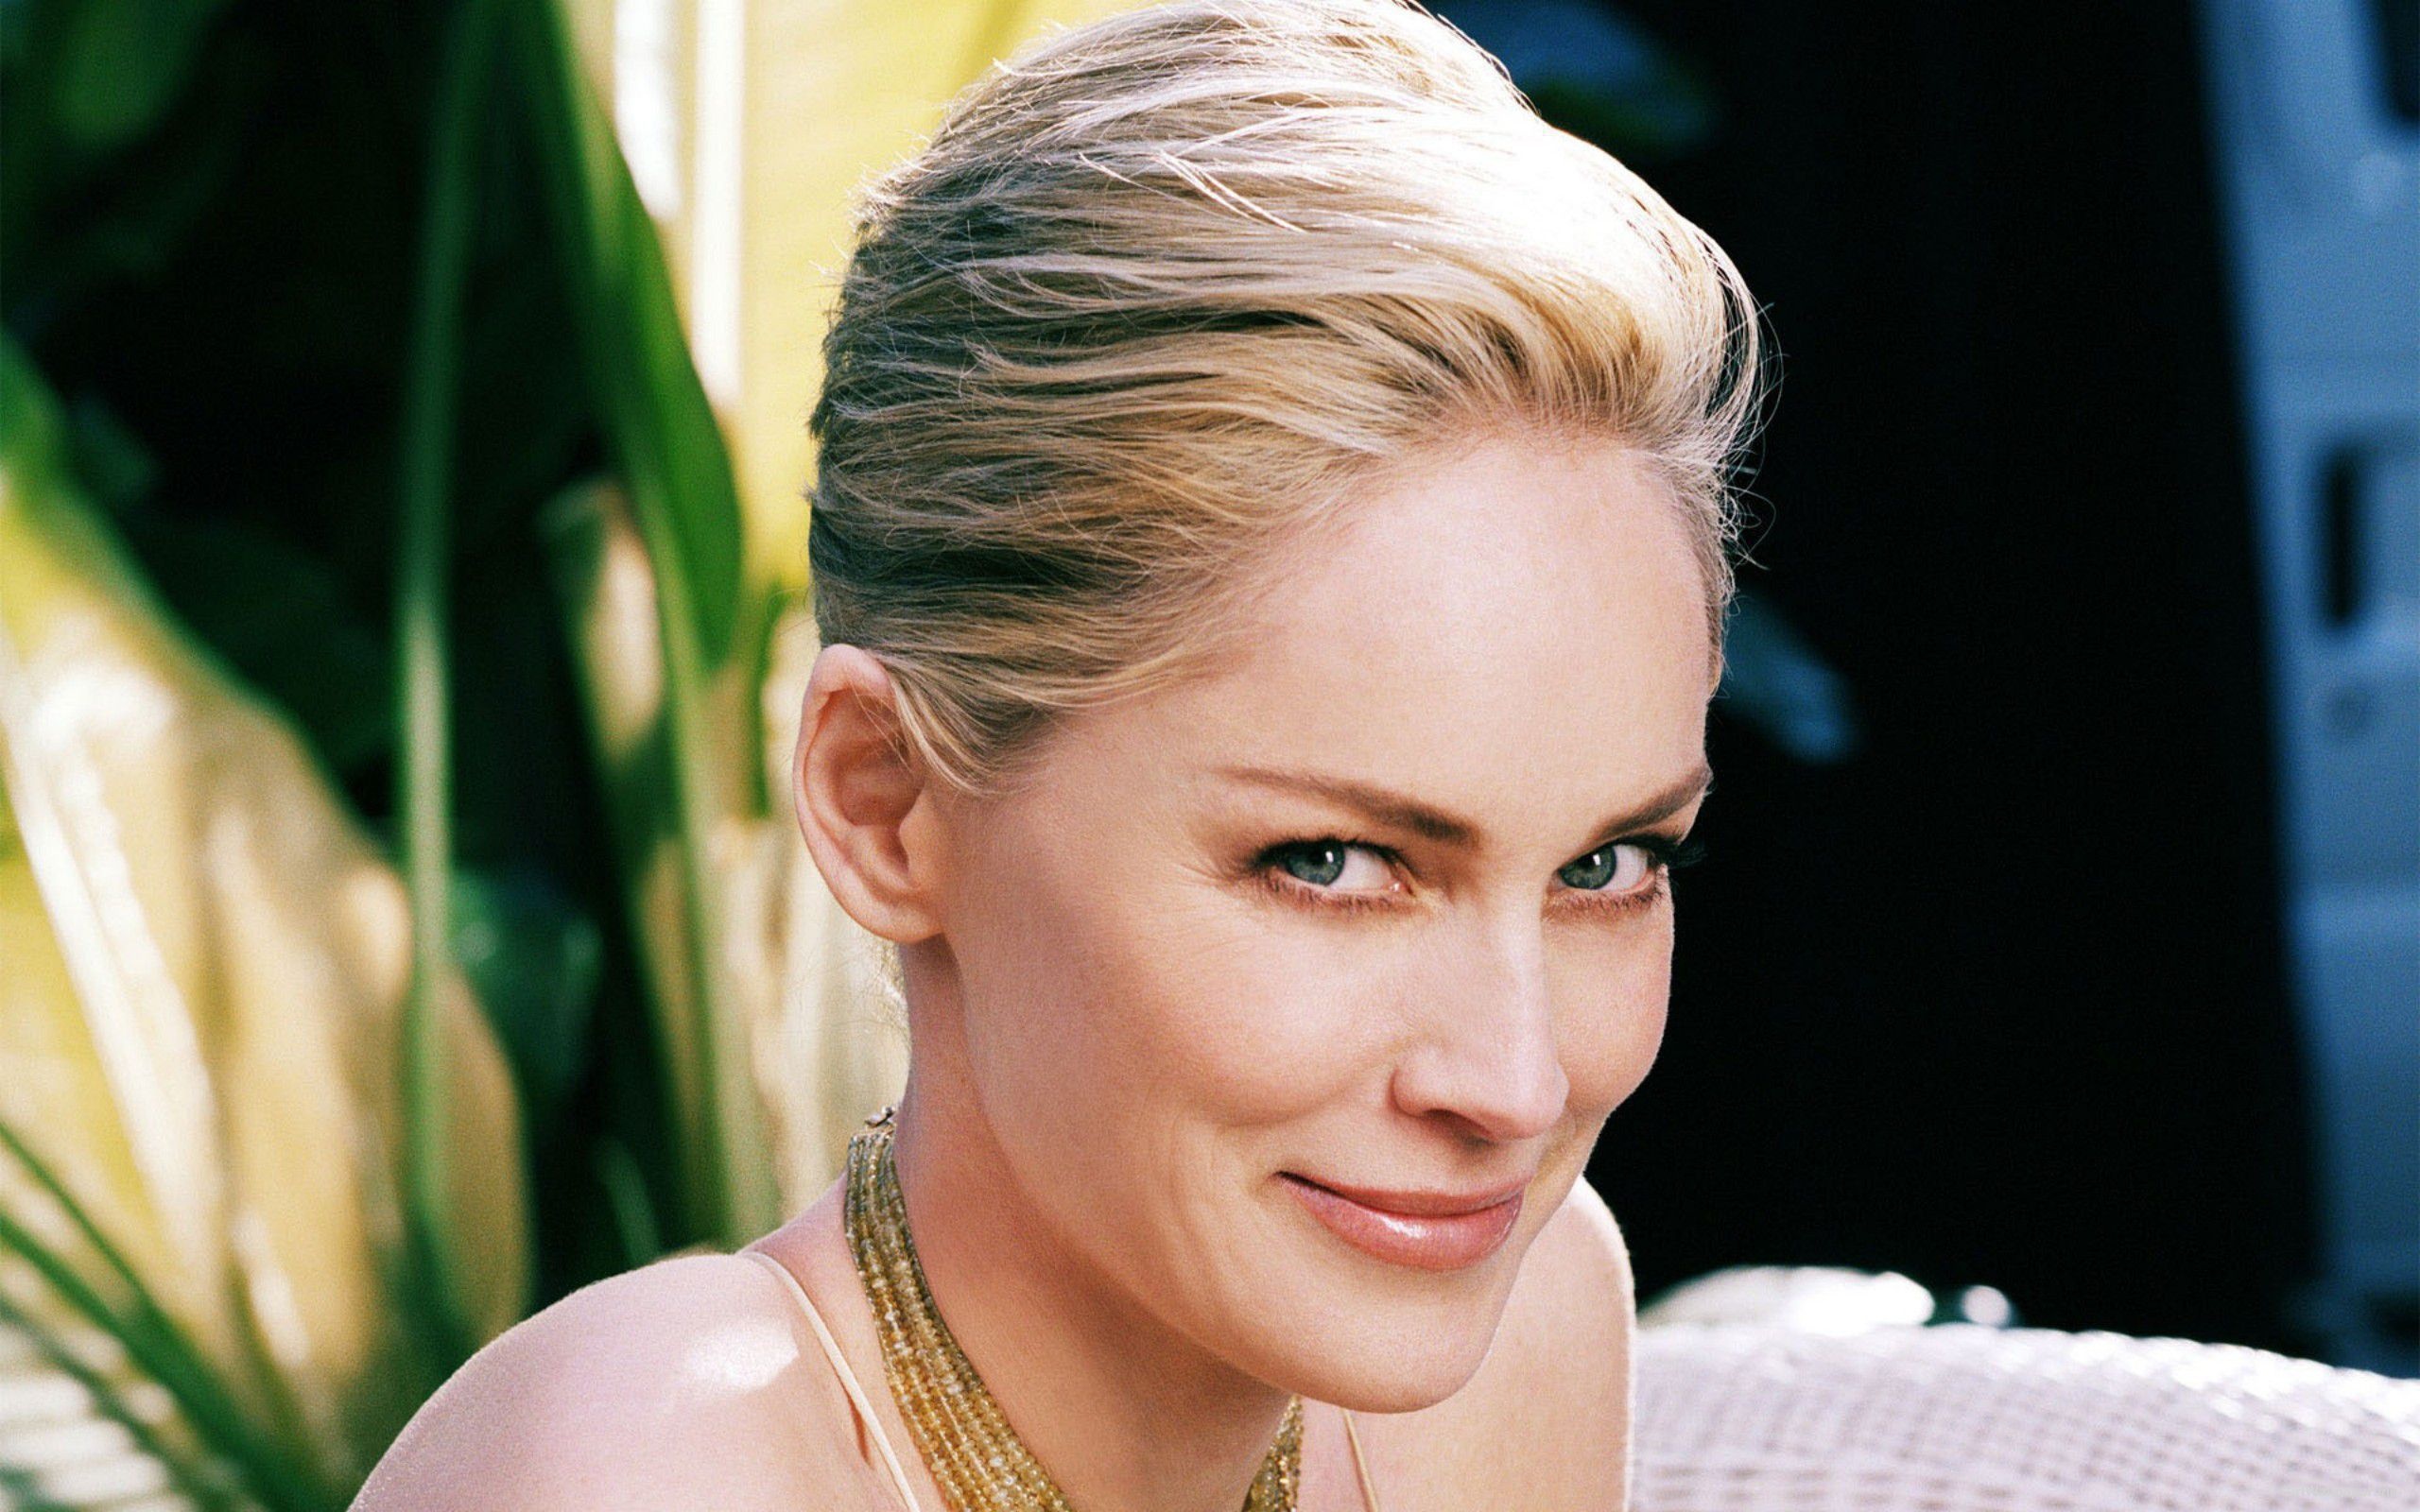 Sharon Stone, Stunning wallpapers, Michelle Johnson's collection, Movie enchantment, 2560x1600 HD Desktop